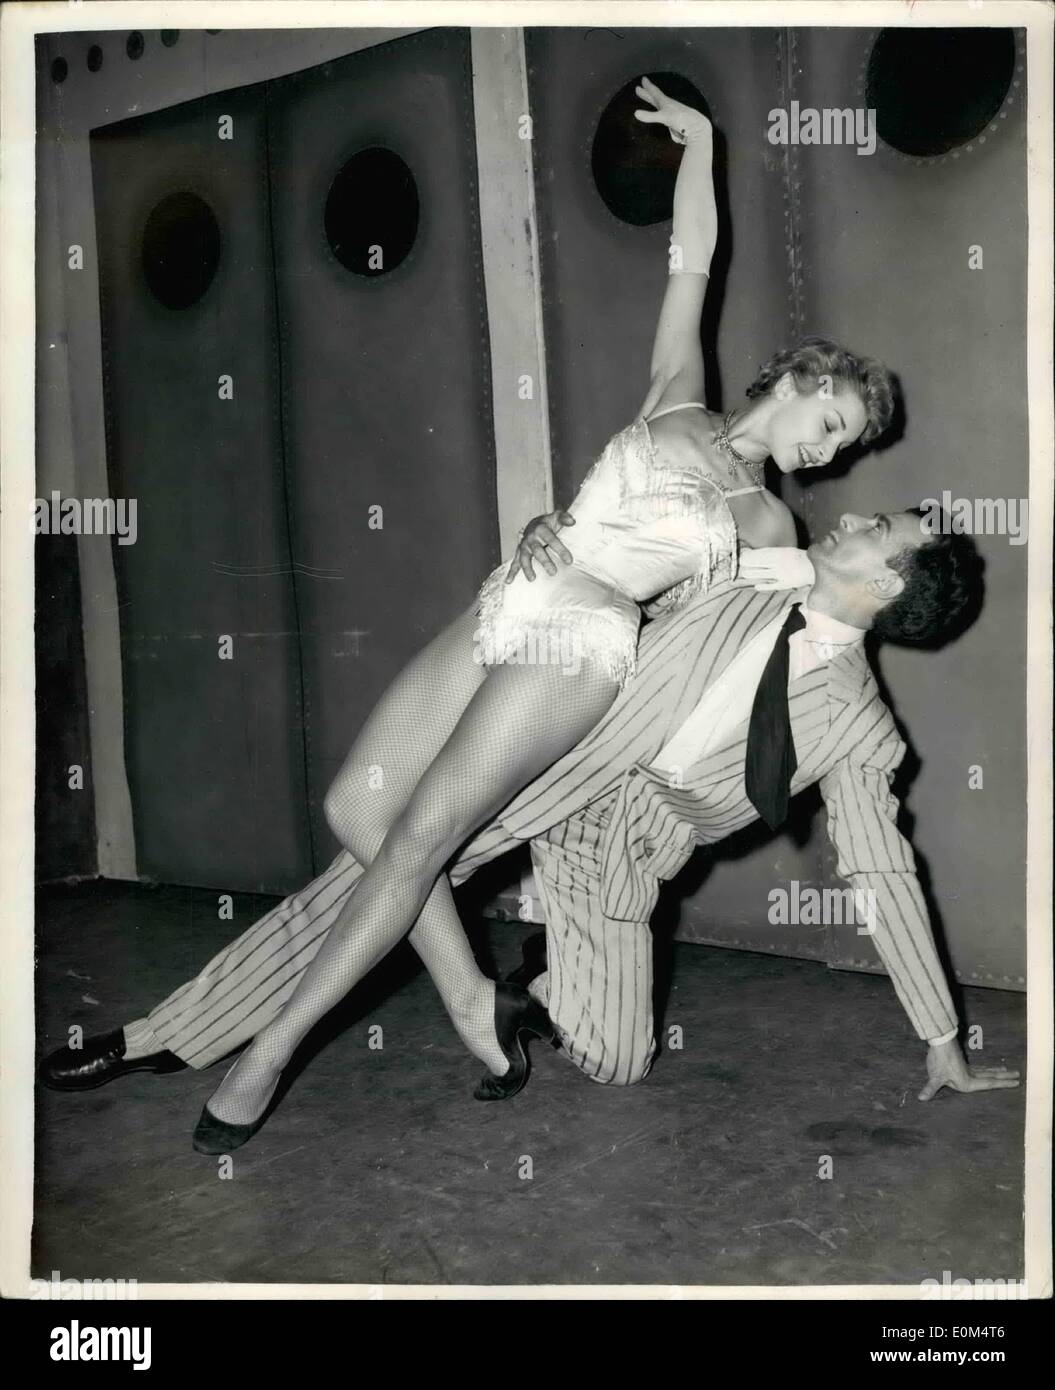 Aug. 08, 1953 - Dress rehearsal for Stoll ballet. Roland Petit's ''Ballets de Paris'' opens a five-weeks season at the Stoll Theater this evening. Roland Petit heads the company, which includes Collette Marchand, who was the star of the film ''Moulin Rouge''. Dress rehearsals were hold today. Photo Shows Colette Marchand and Roland Petit, seen during today's rehearsal of the ballet ''Cine-Bijou'' -at the Stoll theater. Stock Photo